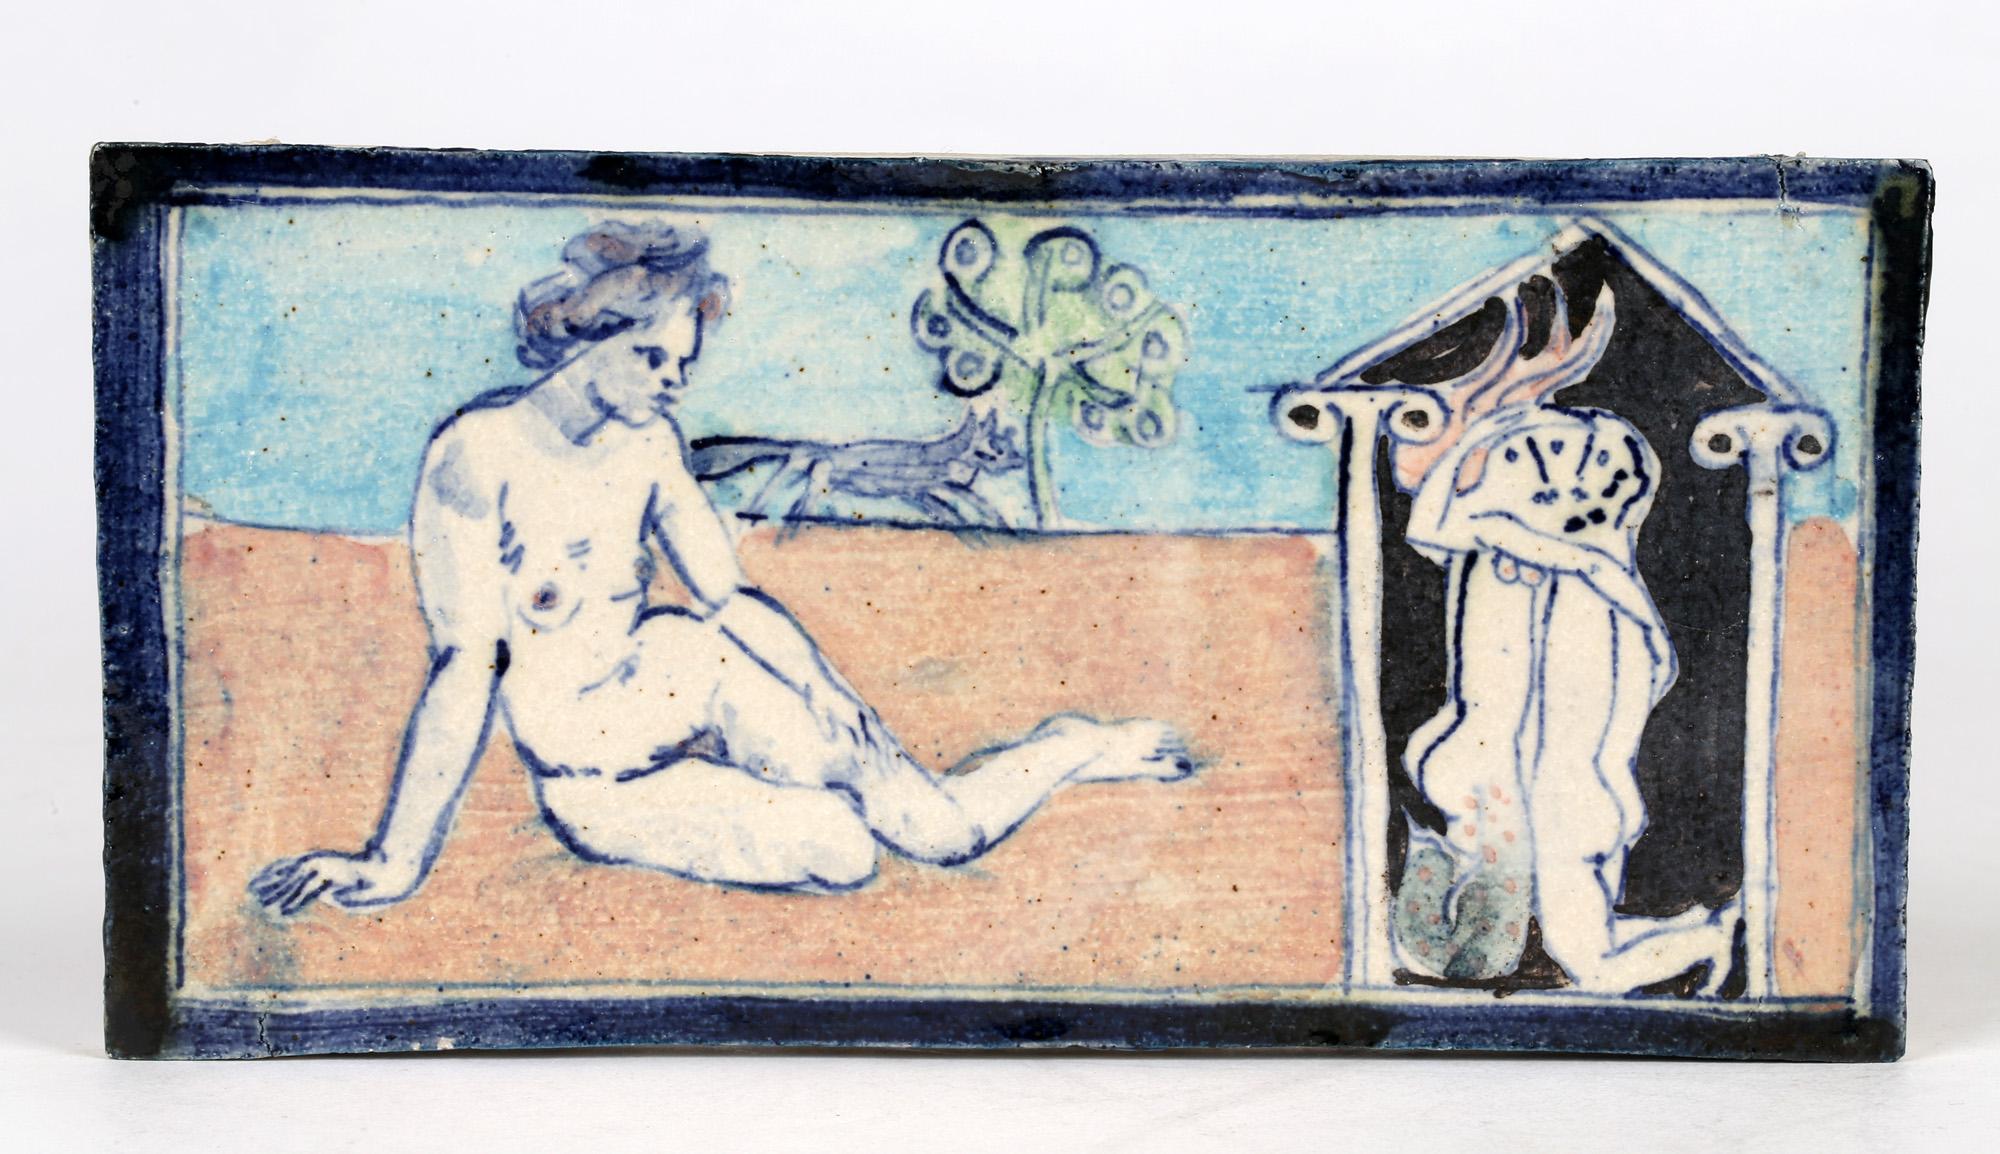 Hand-Painted Eric James Mellon Unique Studio Pottery Tile with Nudes Titled Mermaid For Sale